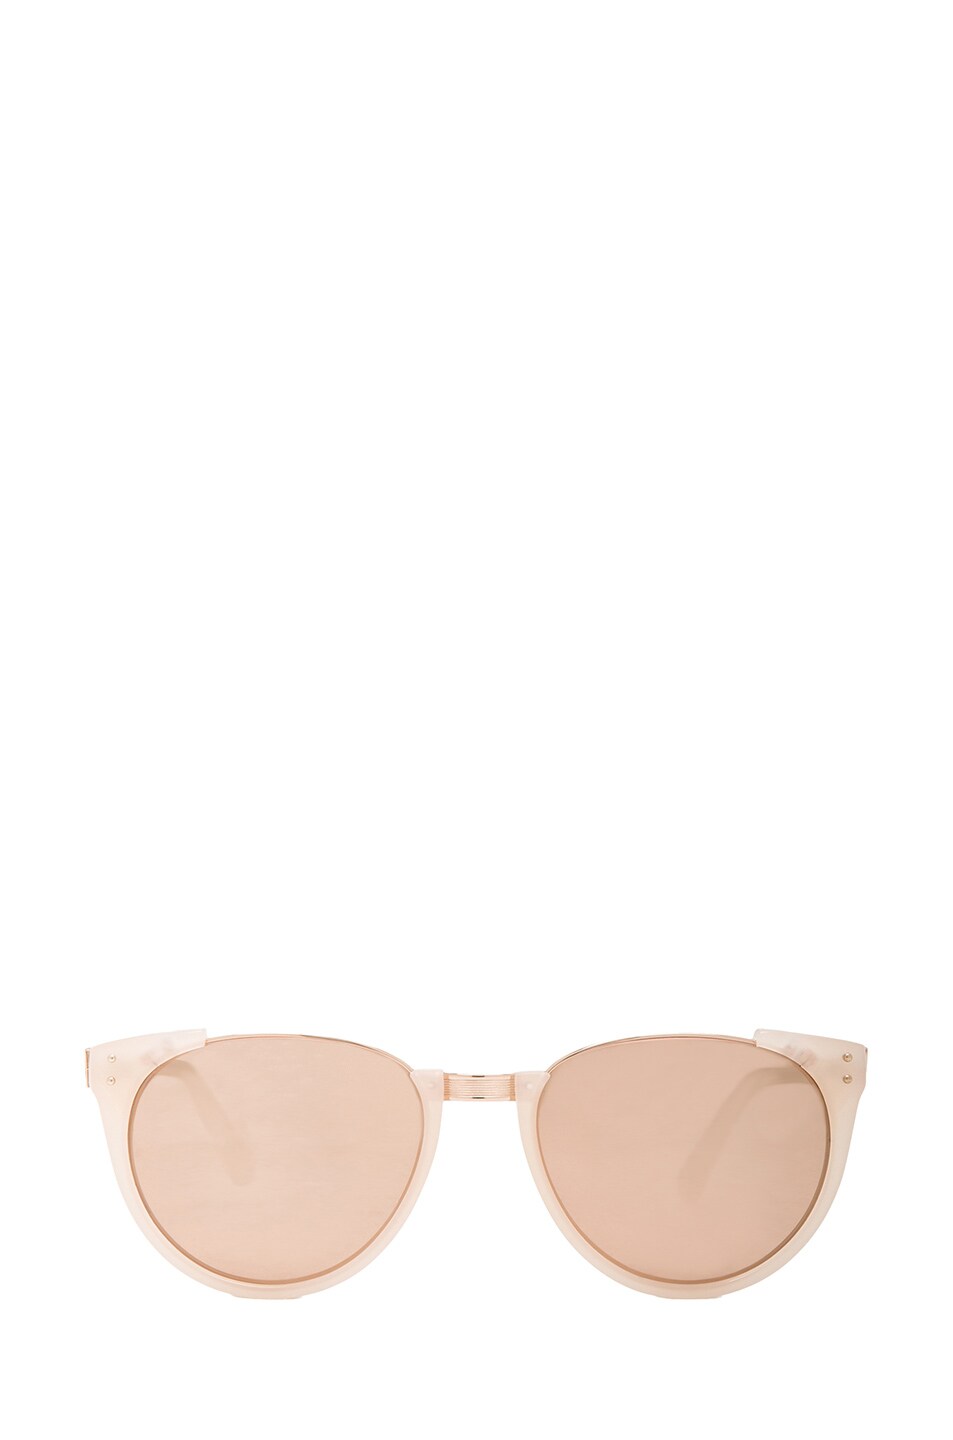 Image 1 of Linda Farrow Round Horned Sunglasses in Milky Pink